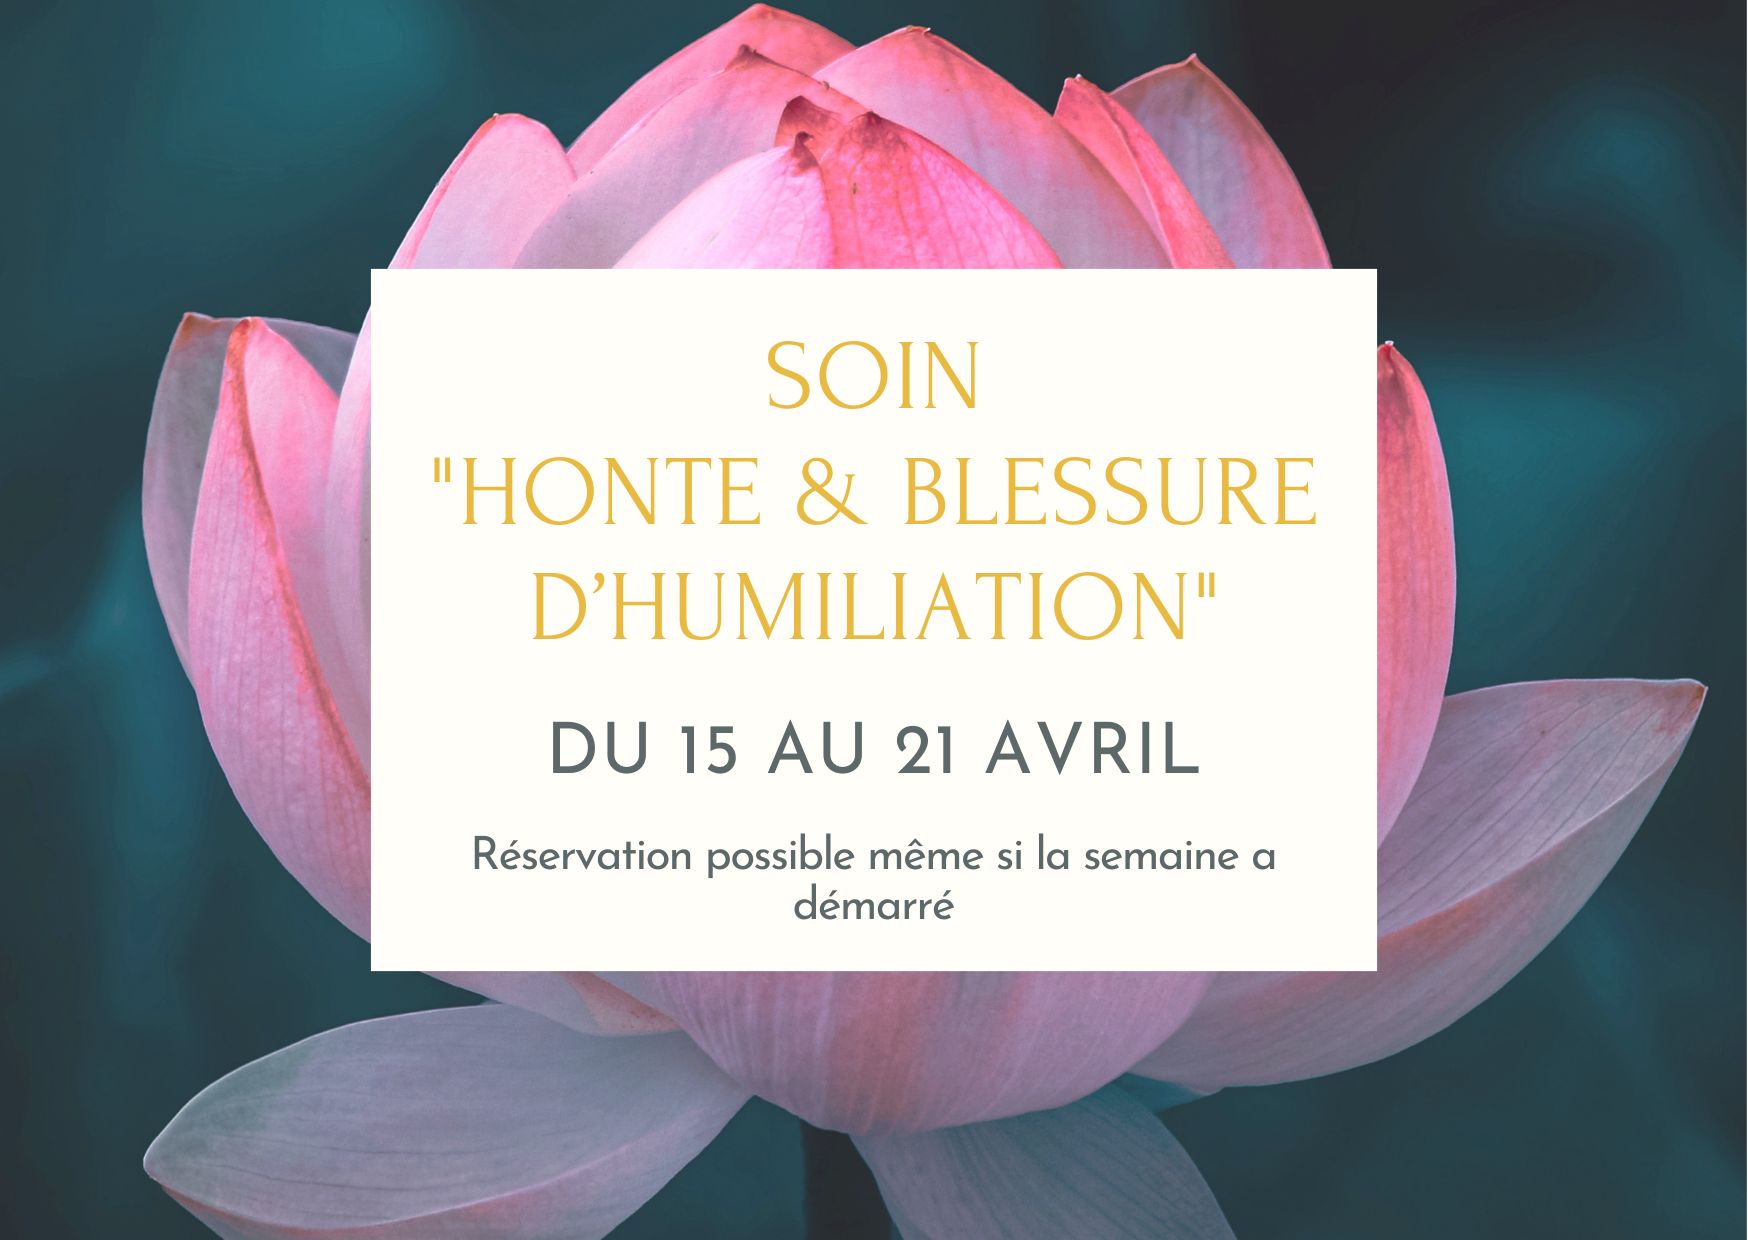 Soin "Blessure d'humiliation"